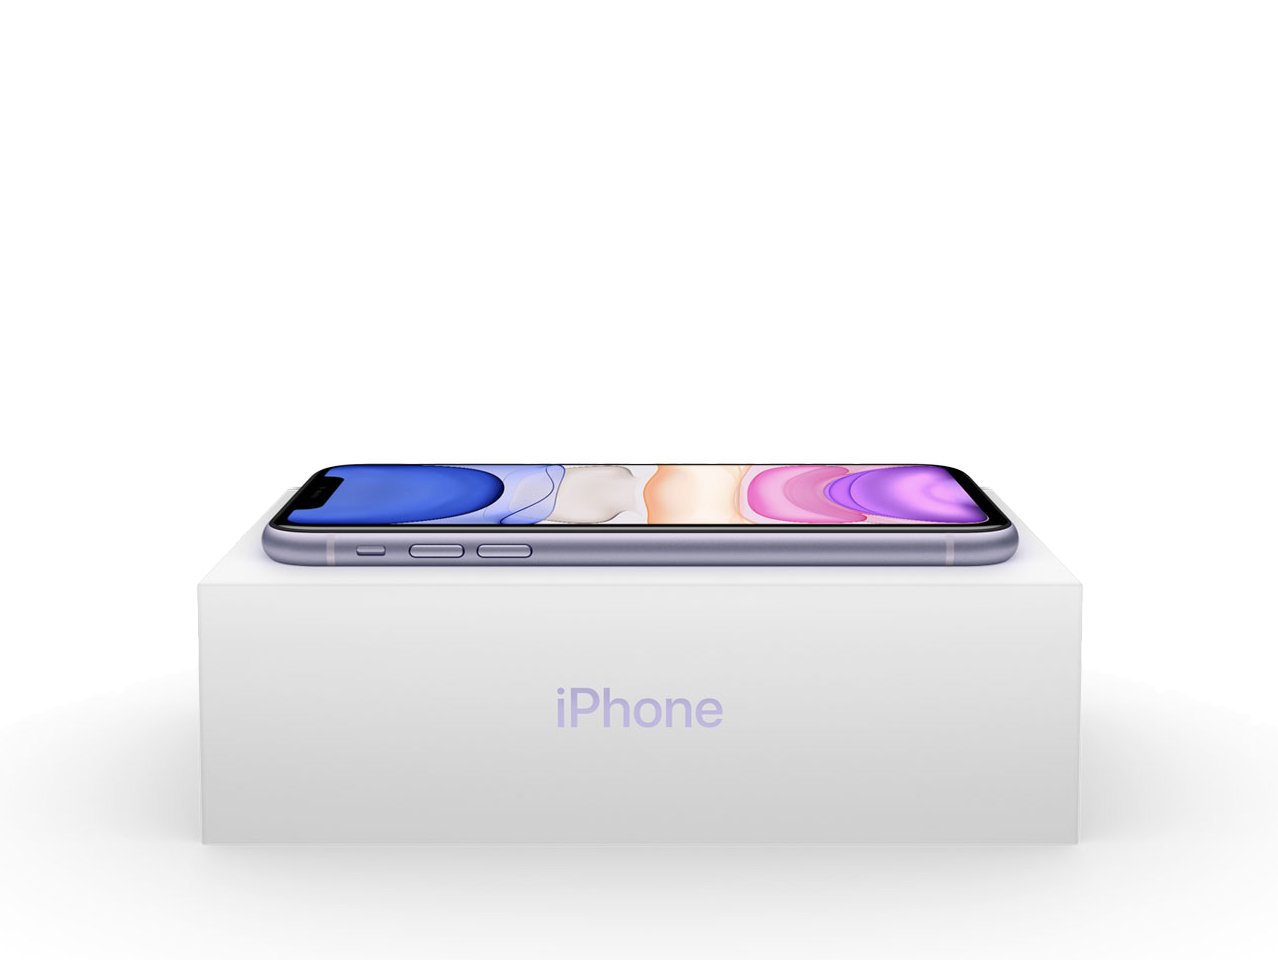 iPhone 11 on top of box